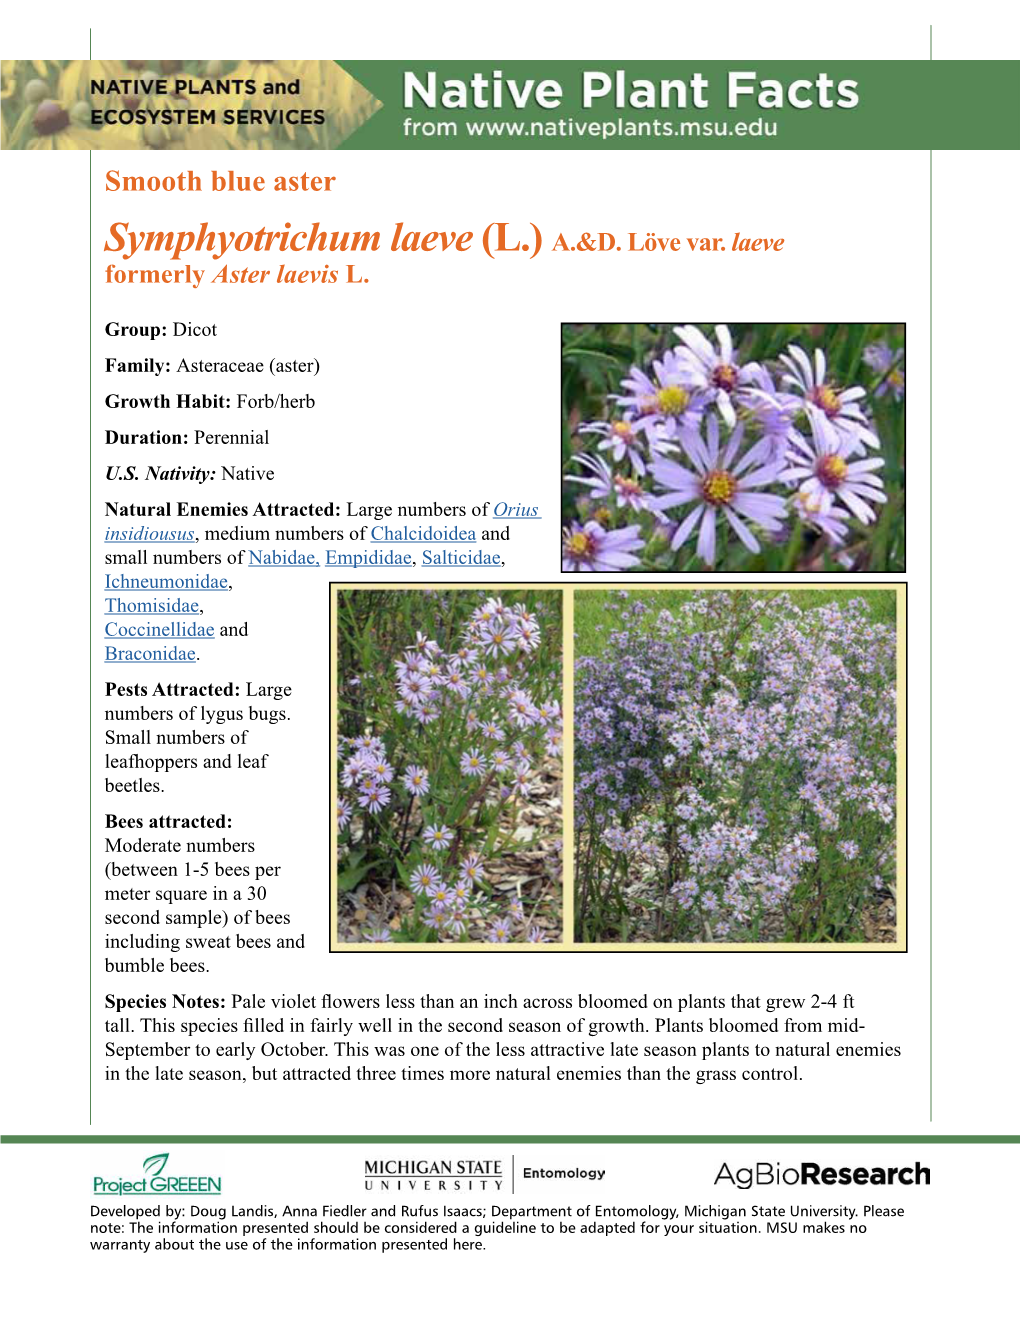 Native Plant Facts: Smooth Blue Aster